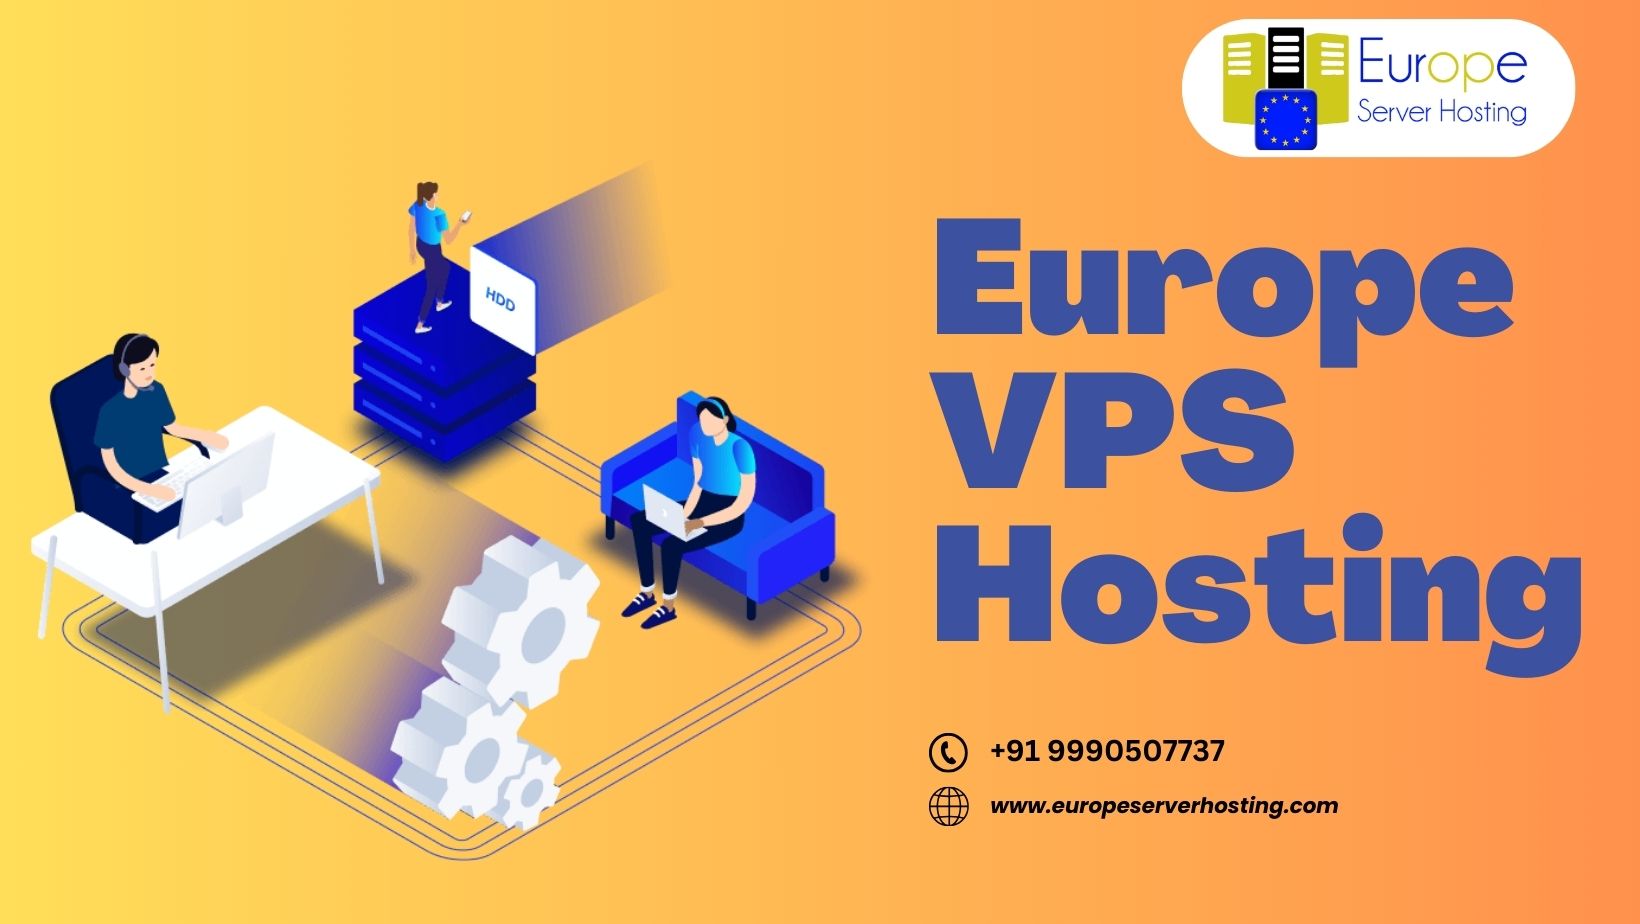 In a Europe VPS hosting environment, you have access to dedicated resources. Unlike shared hosting where multiple websites share the same server resources, a VPS allocates specific CPU, RAM, and storage to your virtual server